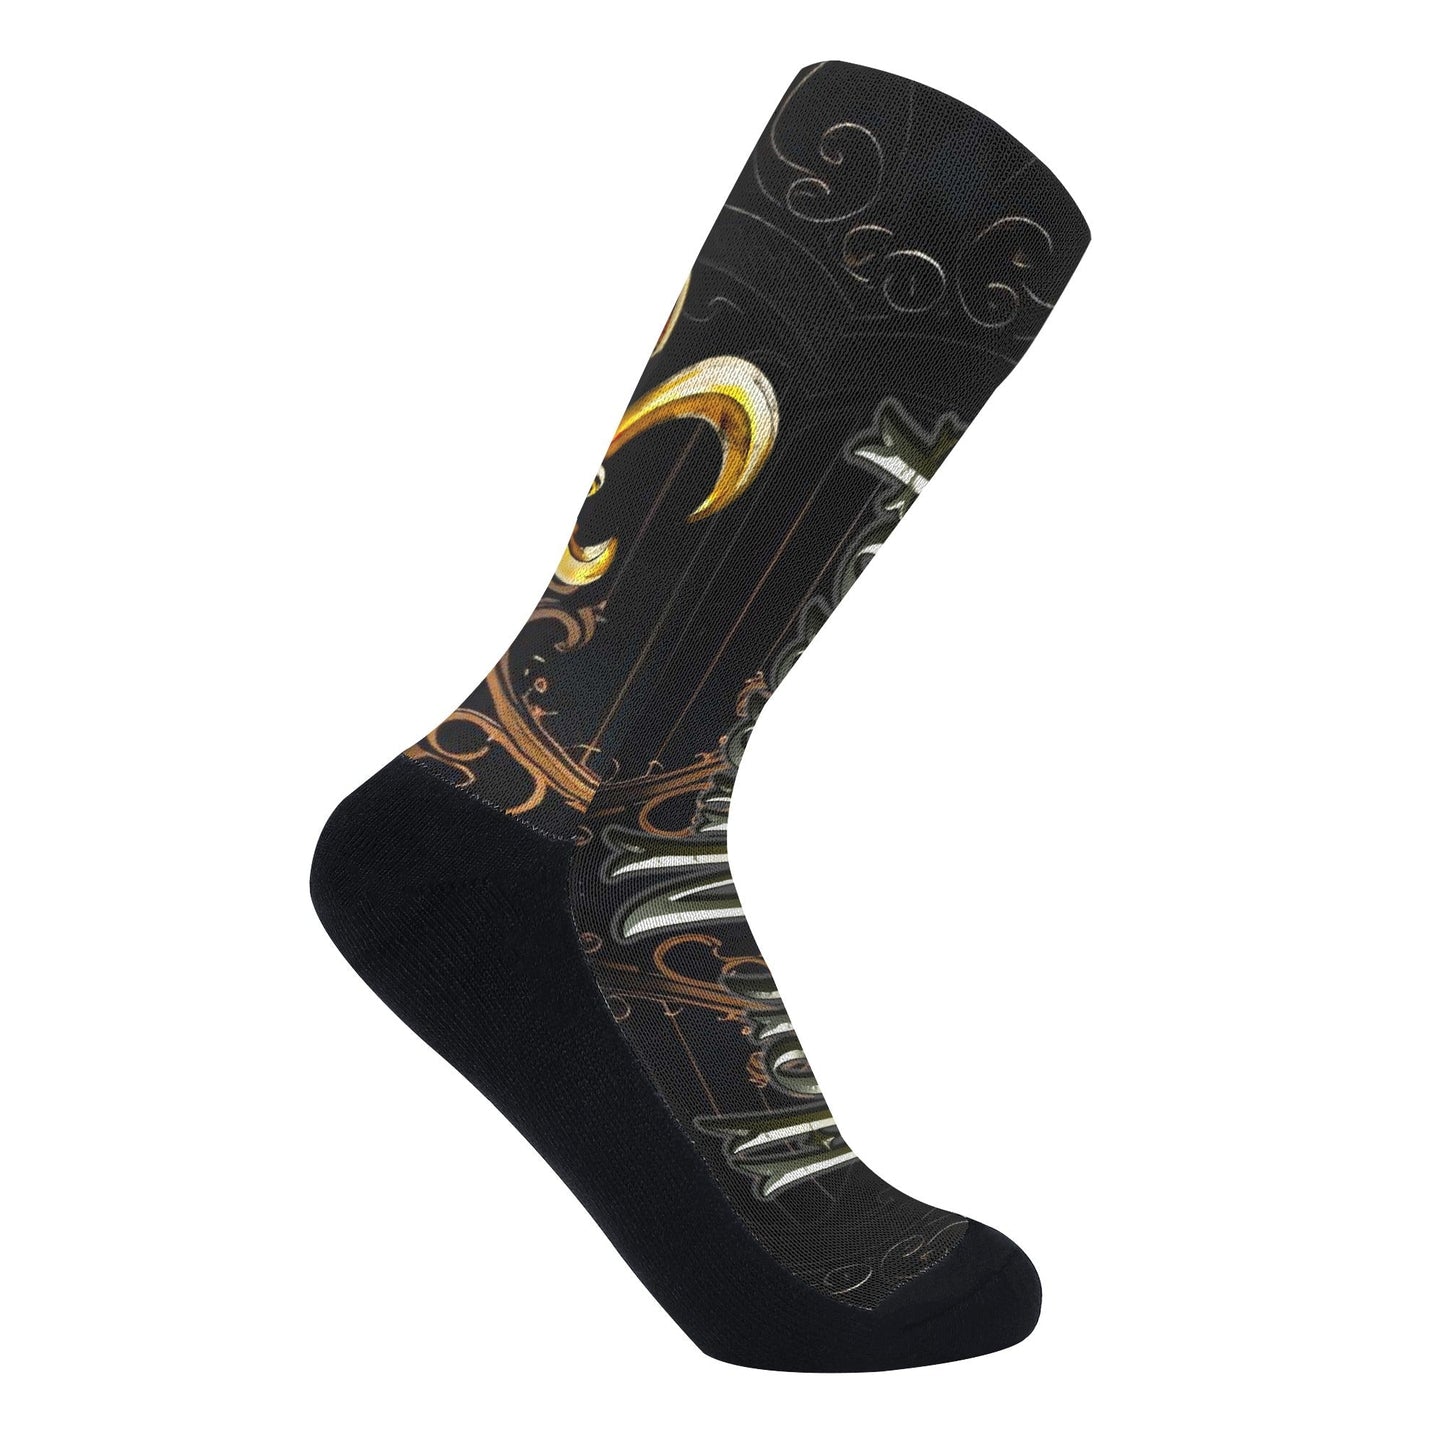 Stand out  with the  Socks  available at Hey Nugget. Grab yours today!